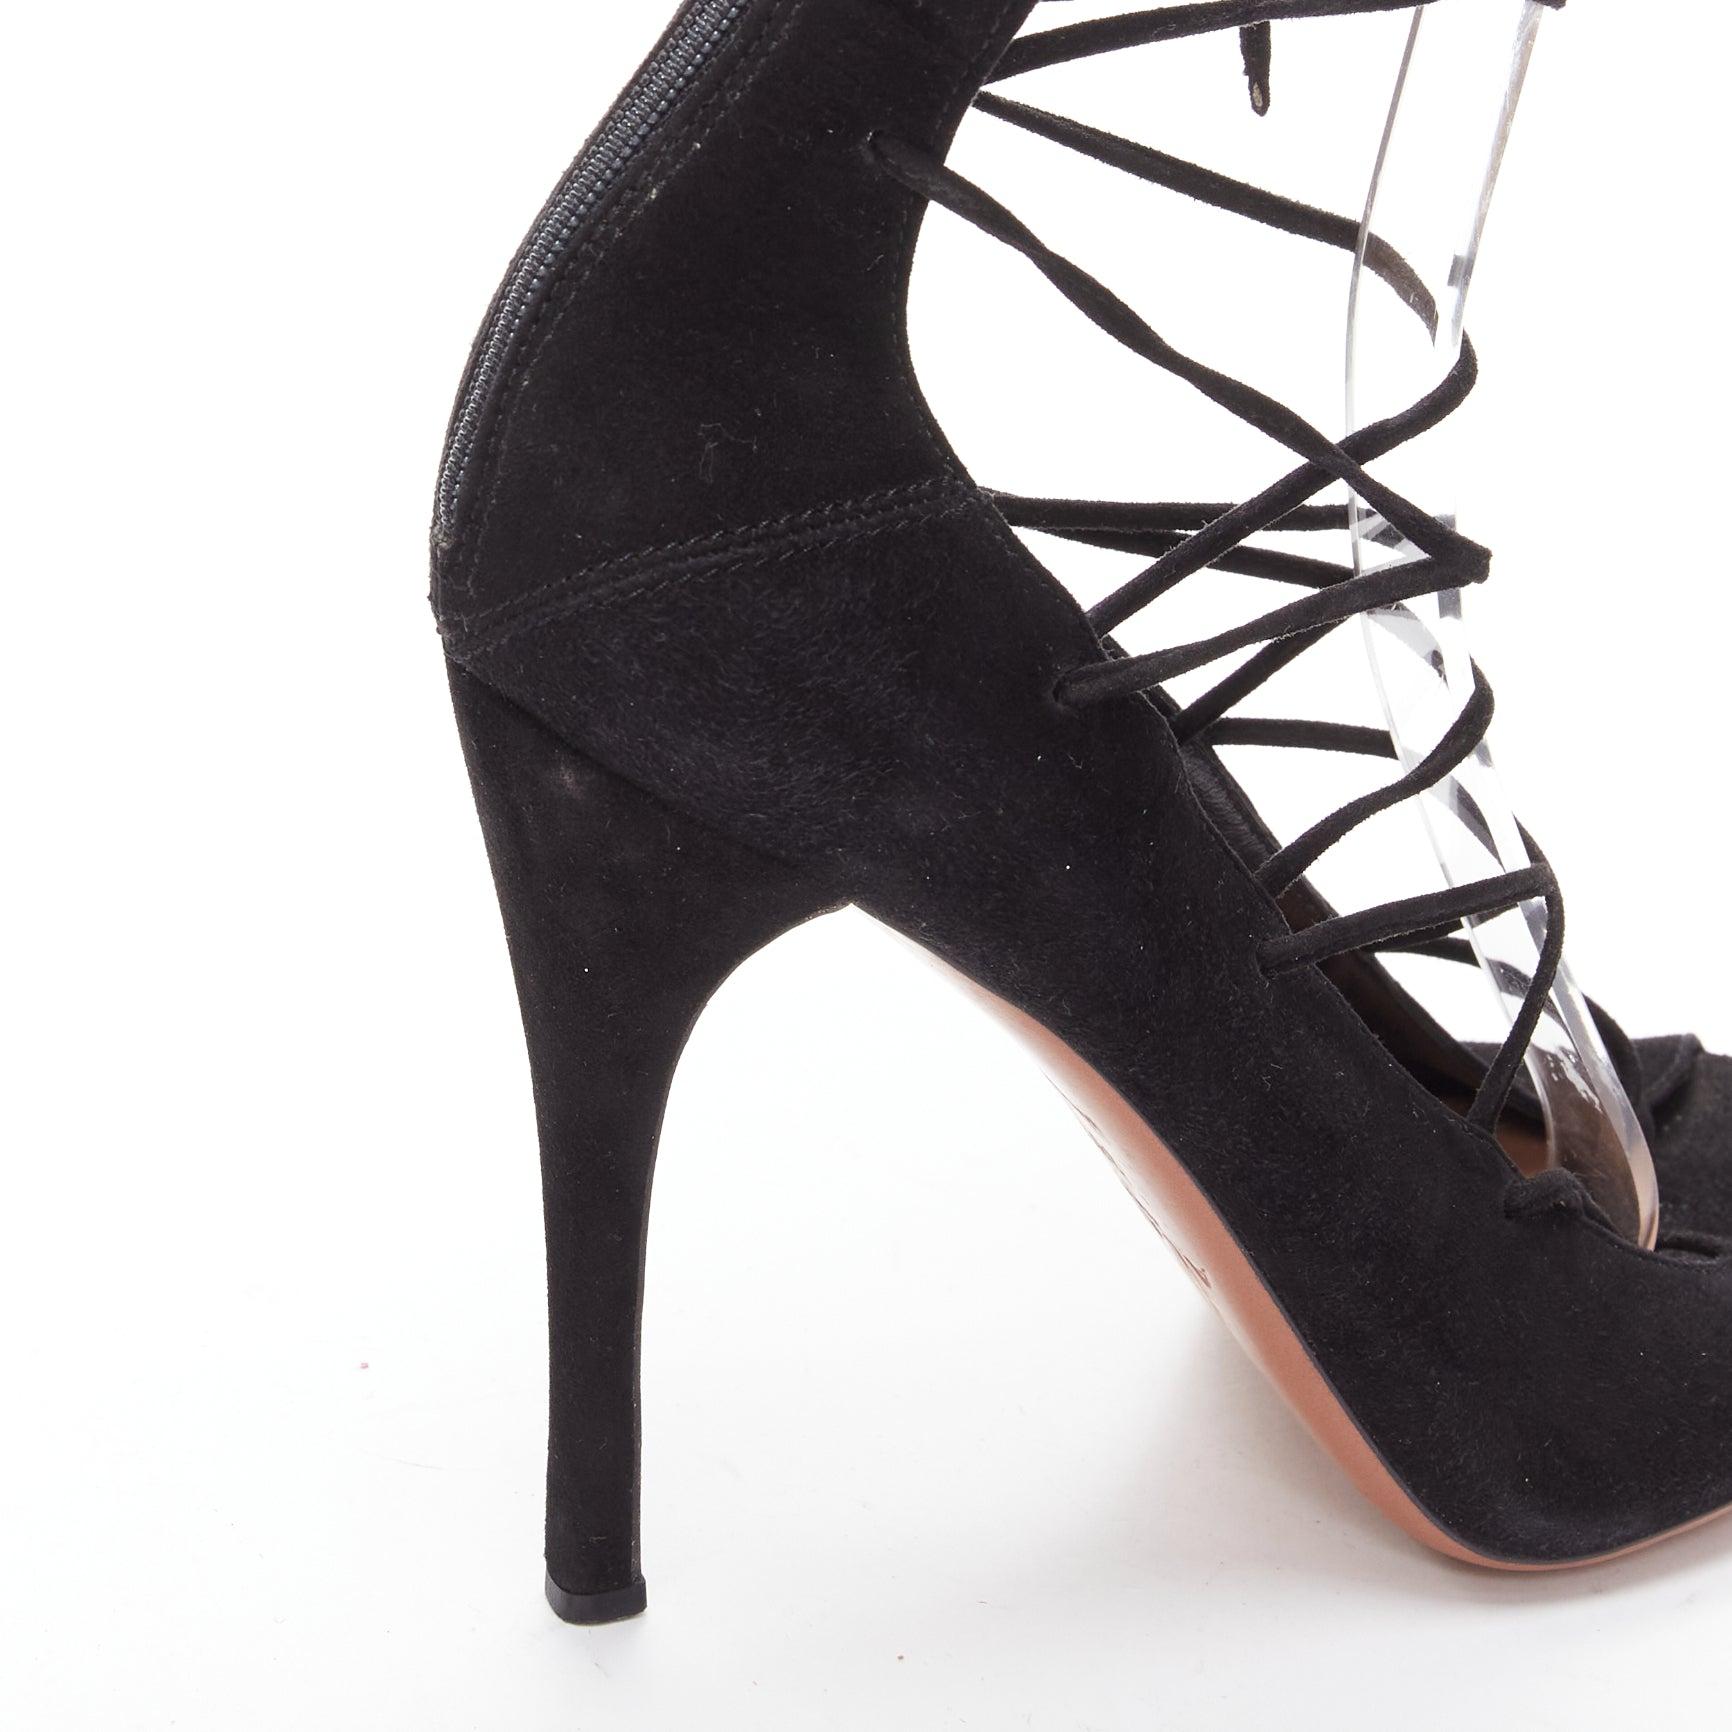 ALAIA black suede leather lace up back zip strappy sandal heels EU38.5 For Sale 4